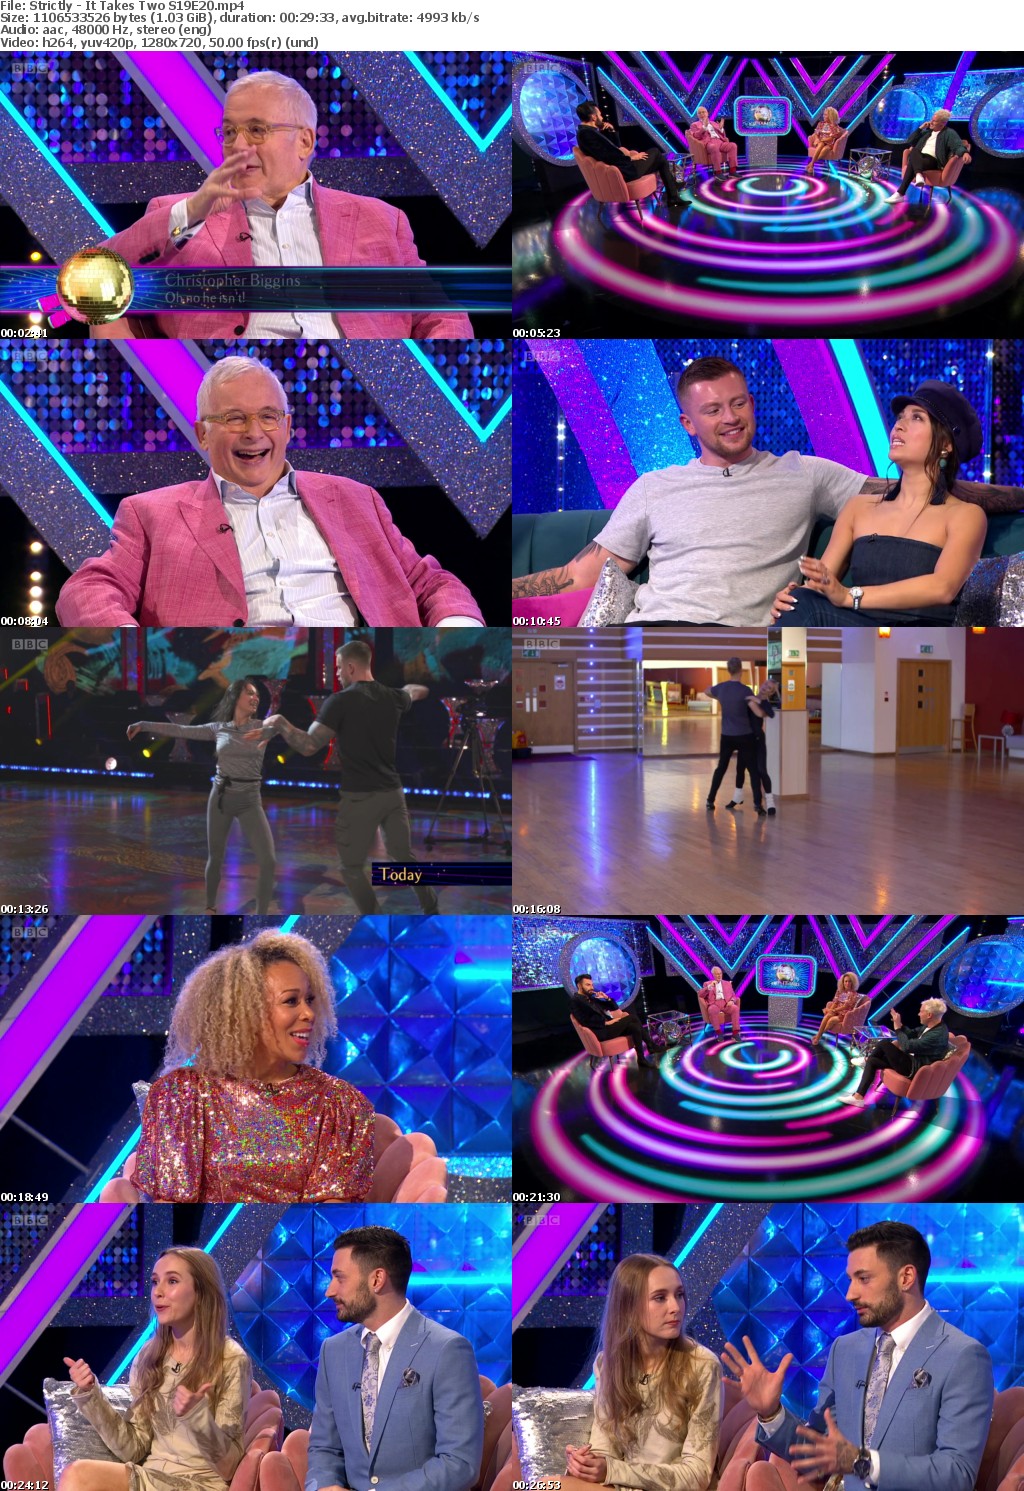 Strictly - It Takes Two S19E20 (1280x720p HD, 50fps, soft Eng subs)